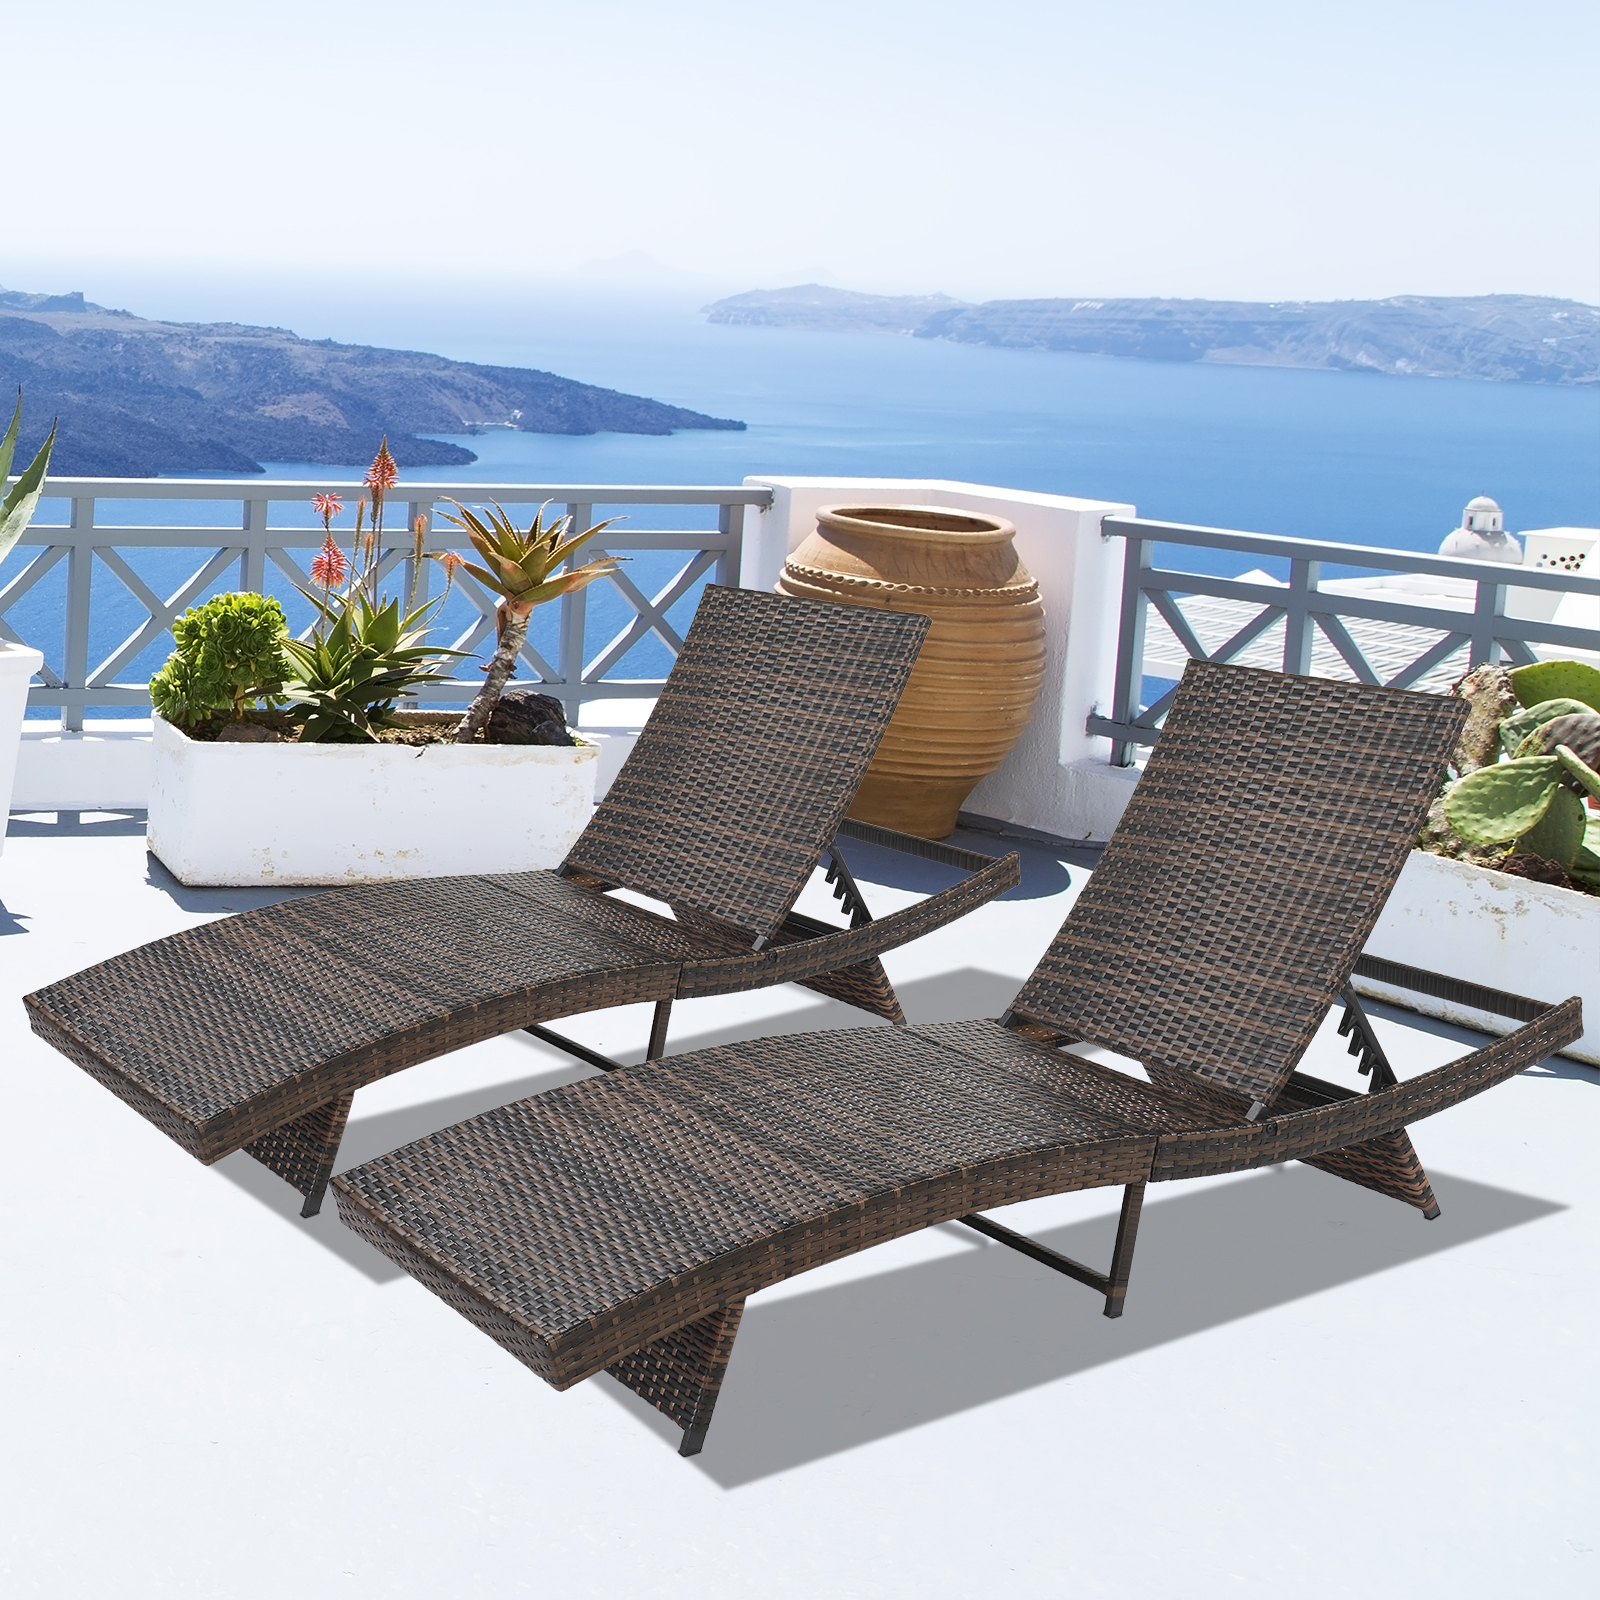 Patio Chaise Lounge Furniture, 5-Position Adjustable Cushioned Rattan Chaise, PE Wicker Backrest Lounger Chair, Suitable for Pool Balcony Deck Yard Garden, B27 - image 4 of 9